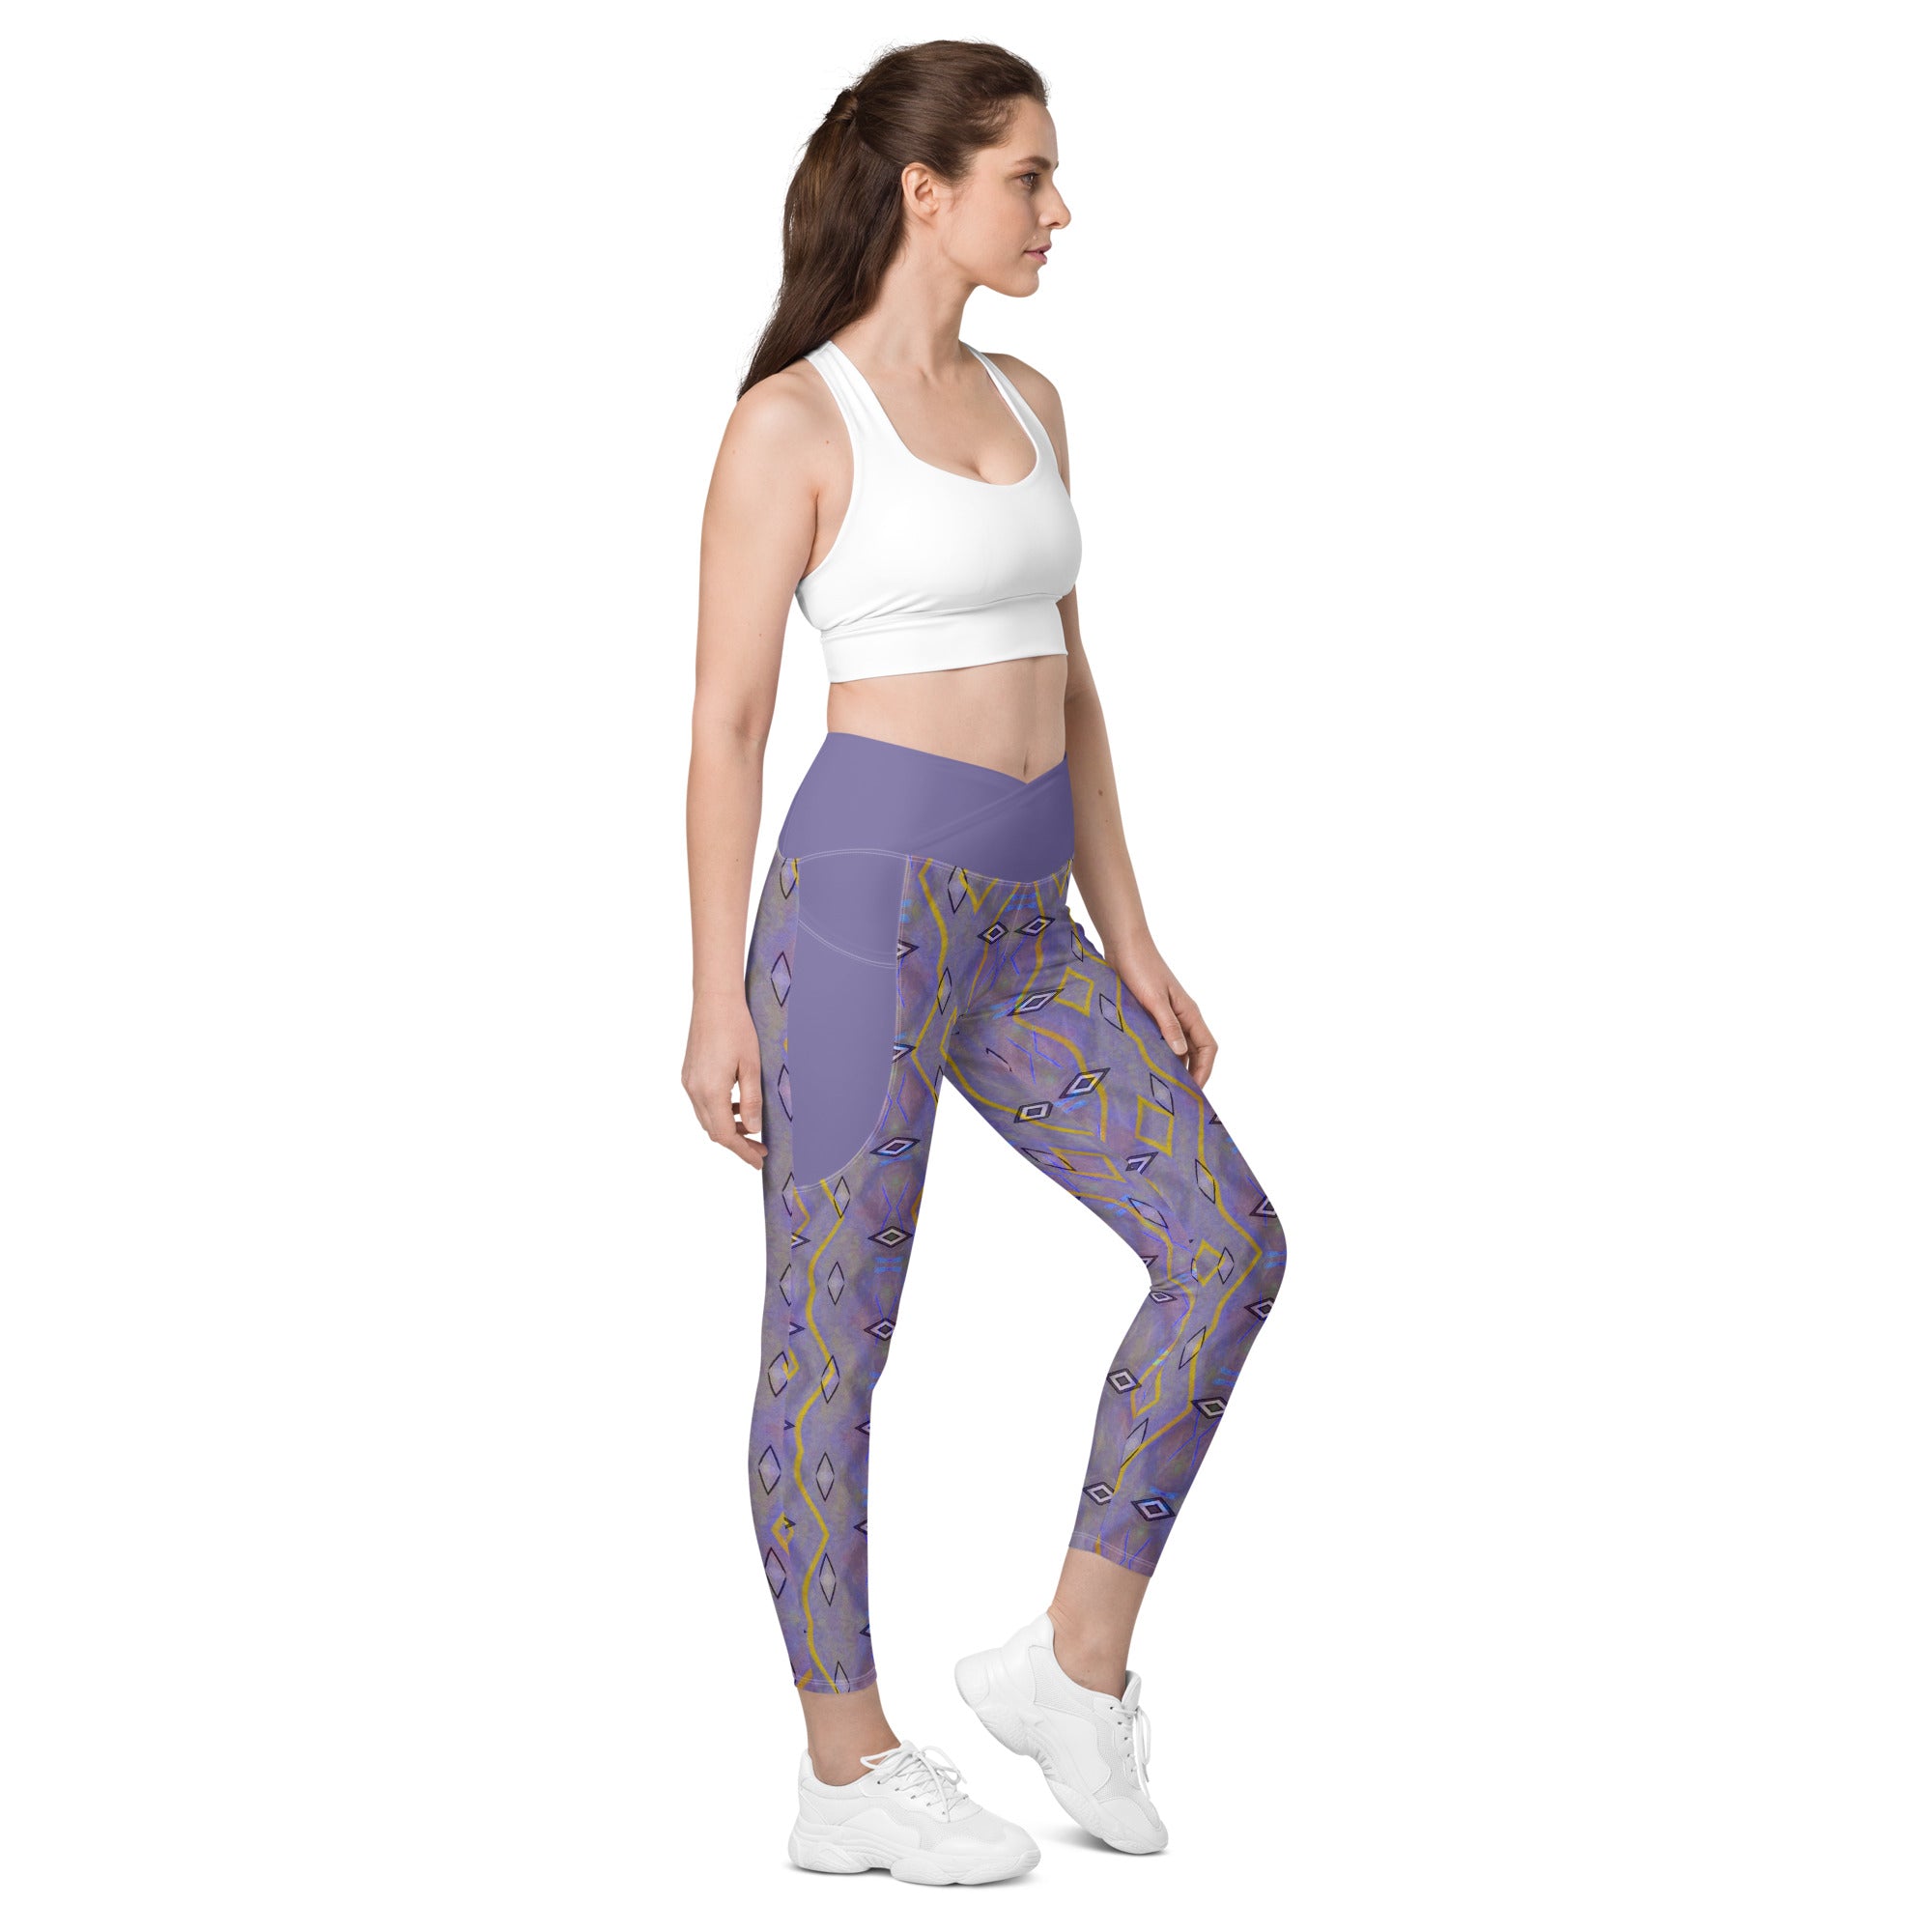 Embracing a cosmic workout in the Cosmic Fusion Tristar Crossover Leggings.